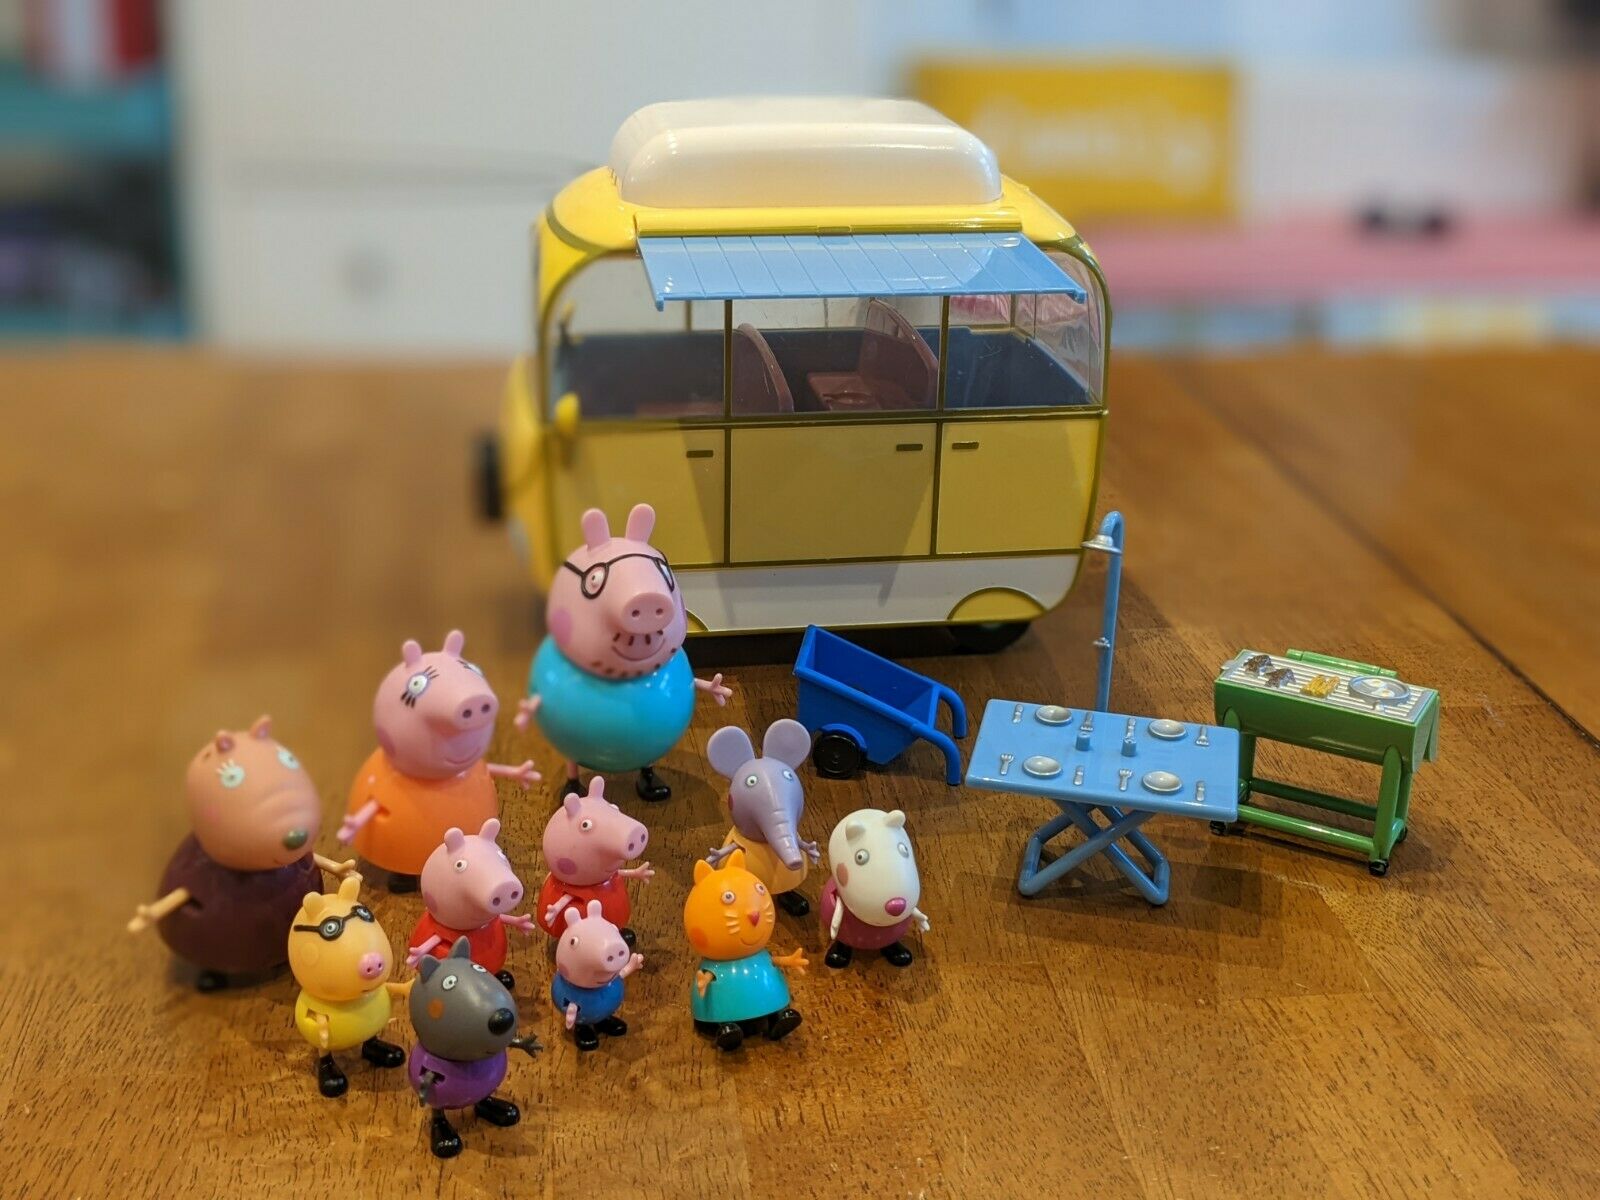 Peppa Pig Family Canopy Camper Van Playset Figures Grill, Table & More